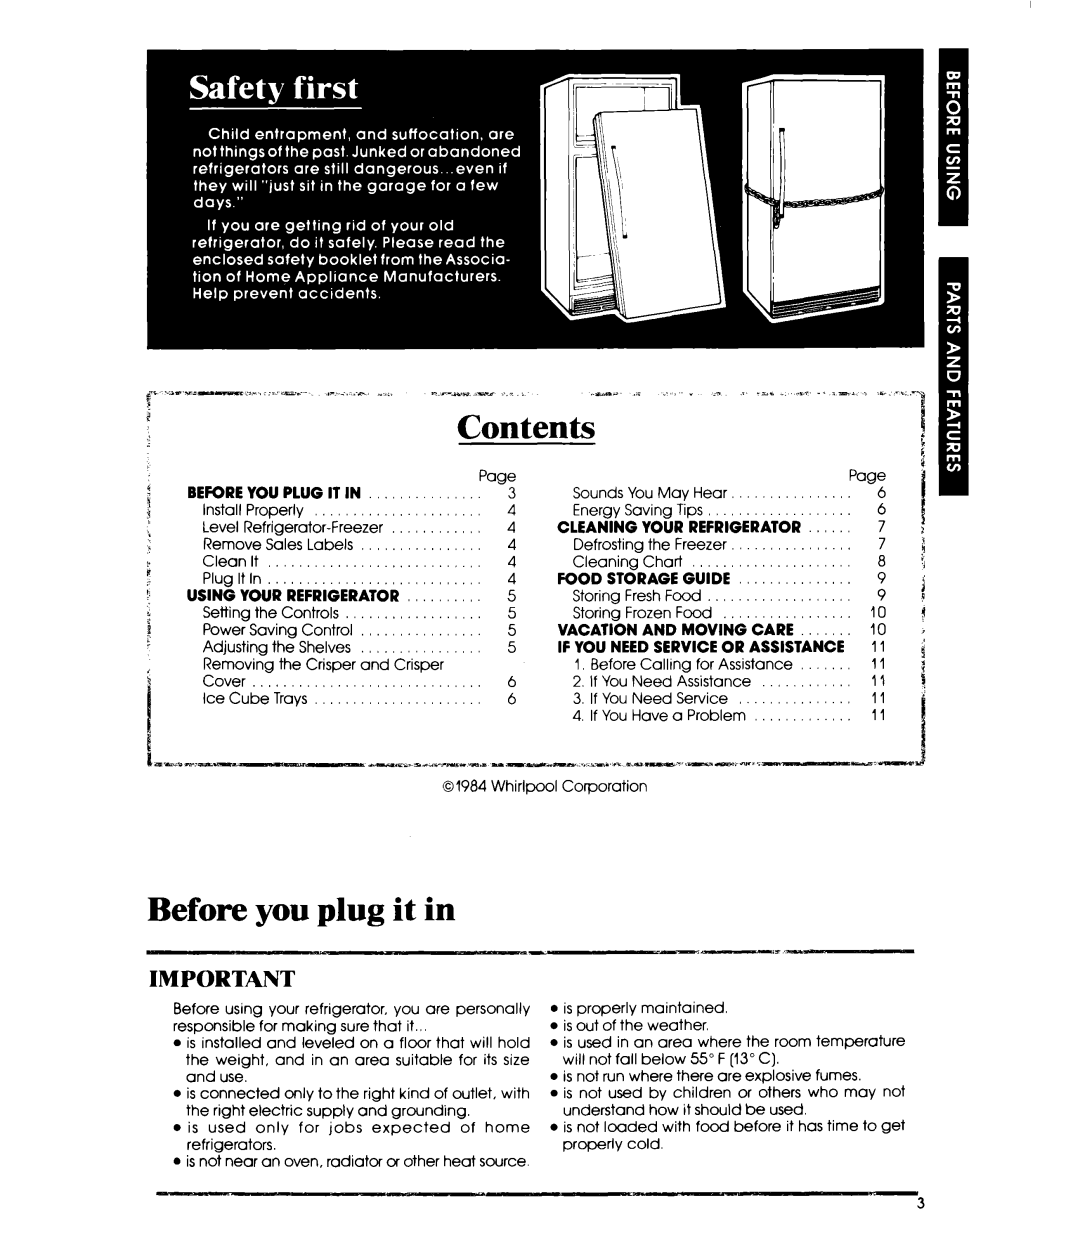 Whirlpool ET12PC manual Contents, Before you plug it in 